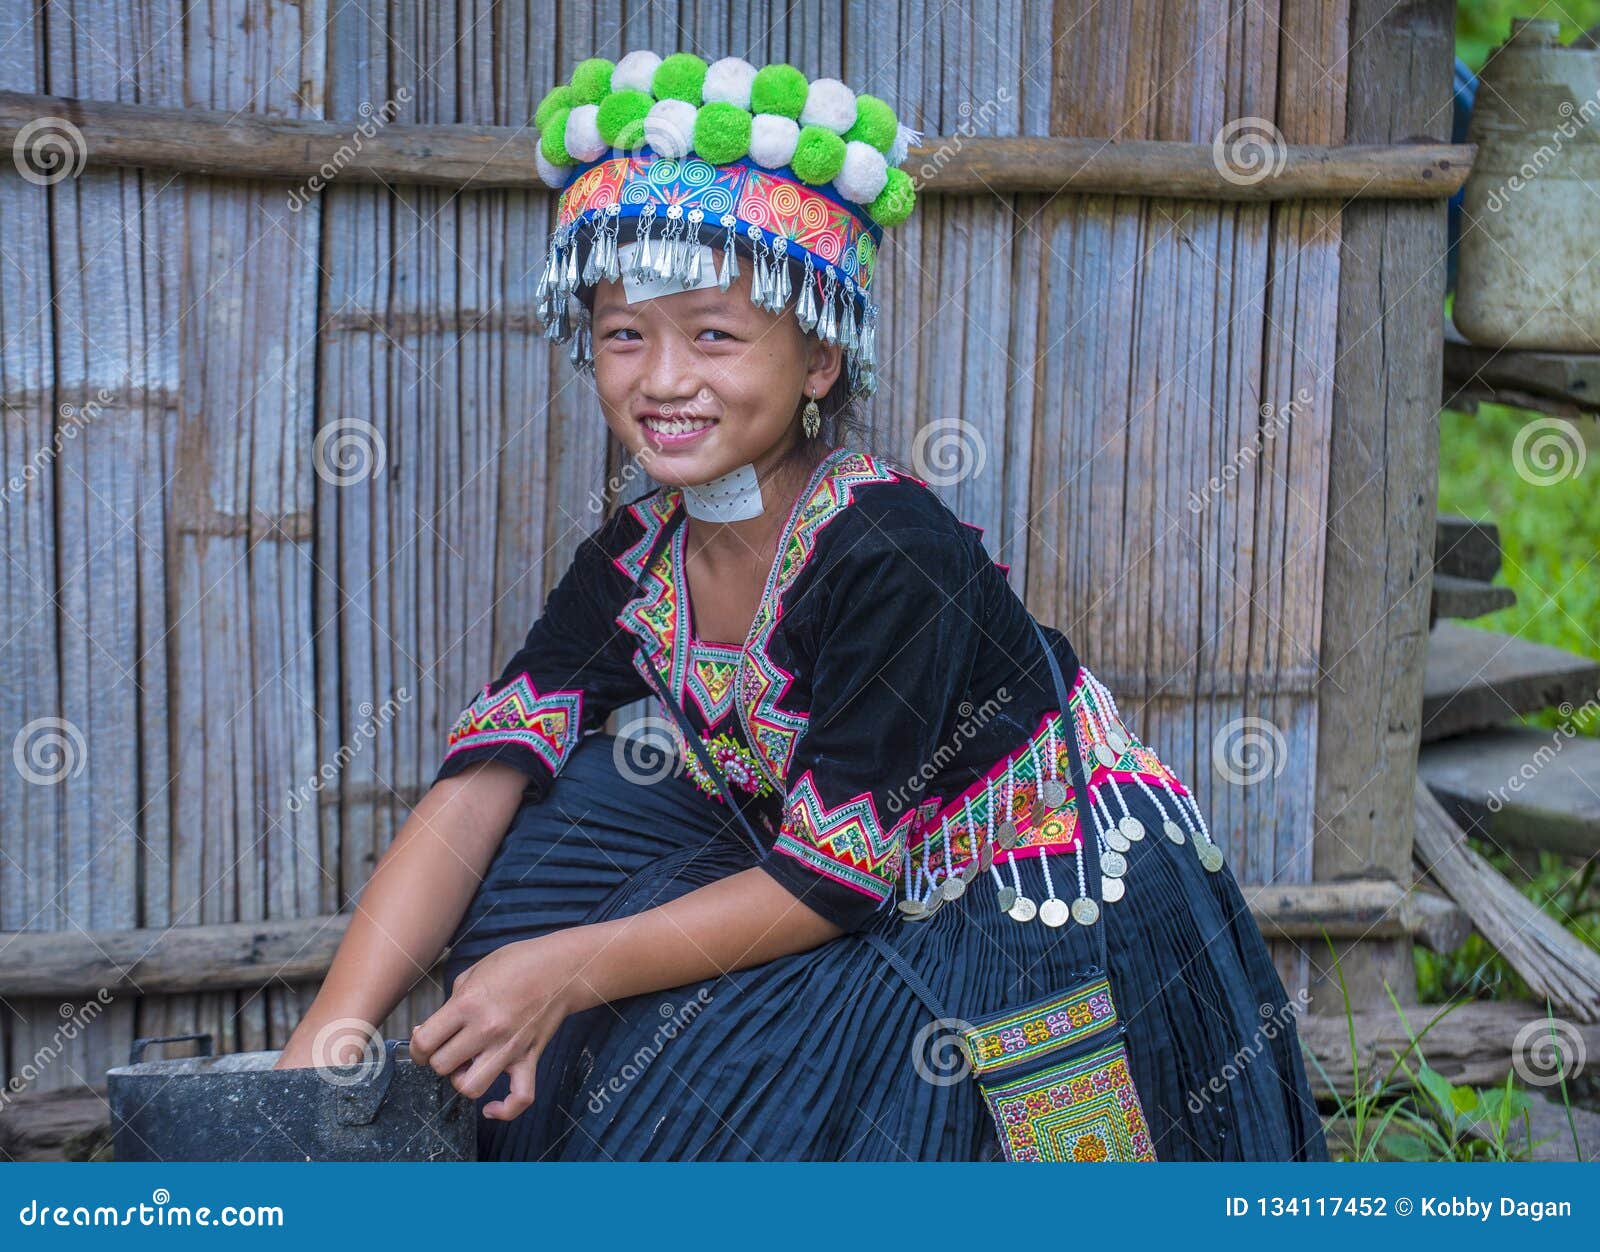 Hmong Ethnic Minority in Laos Editorial Photography - Image of laos ...